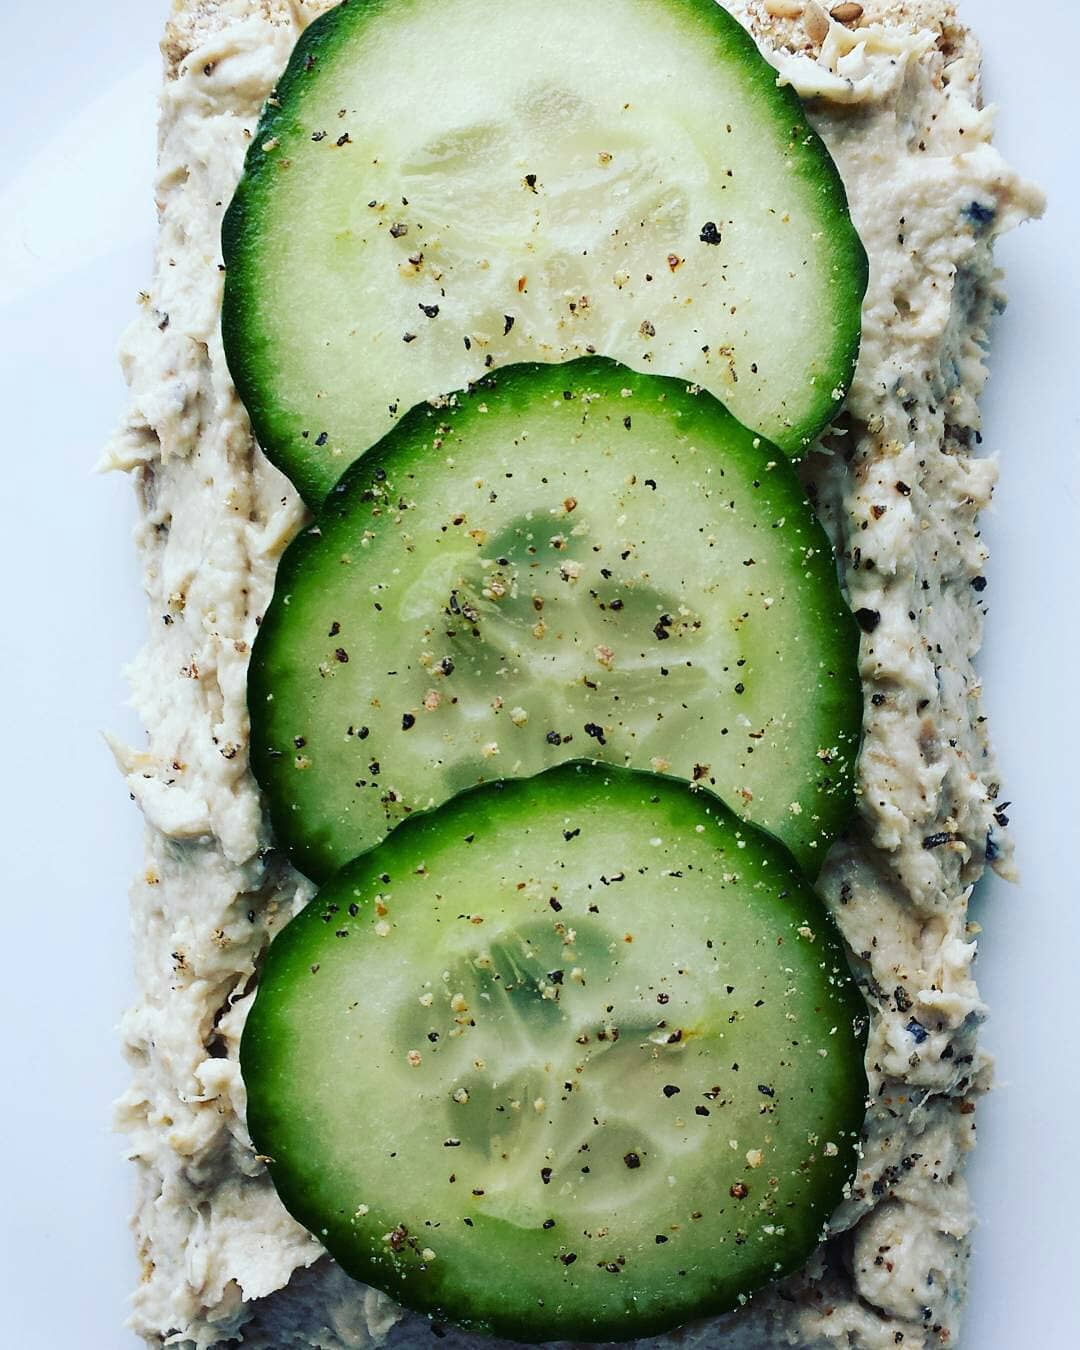 @tobeawarrior @regrann_app super quick and healthy mackerel pate. Blitz up some smoked mackerel (skin off; recommendation-peppered ones) with some cream cheese, horseradish and lemon juice (no exact amounts, I just go on taste) serve on crackers (@ryvita used here) with some cucumber and extra pepper (optional, I’m just a pepper addict lol). Nice for a lunch or snack option 😄
#foodiefriday #food #tasty #tastyfood #quickmeal #snack #lunch #yummy #nutrition #nutritionist #pate #mackerel #cucumber #pepper #eatwell #healthyeating #homemade #fish #fishy –
Tag us in some pics if you decide to make it 😉